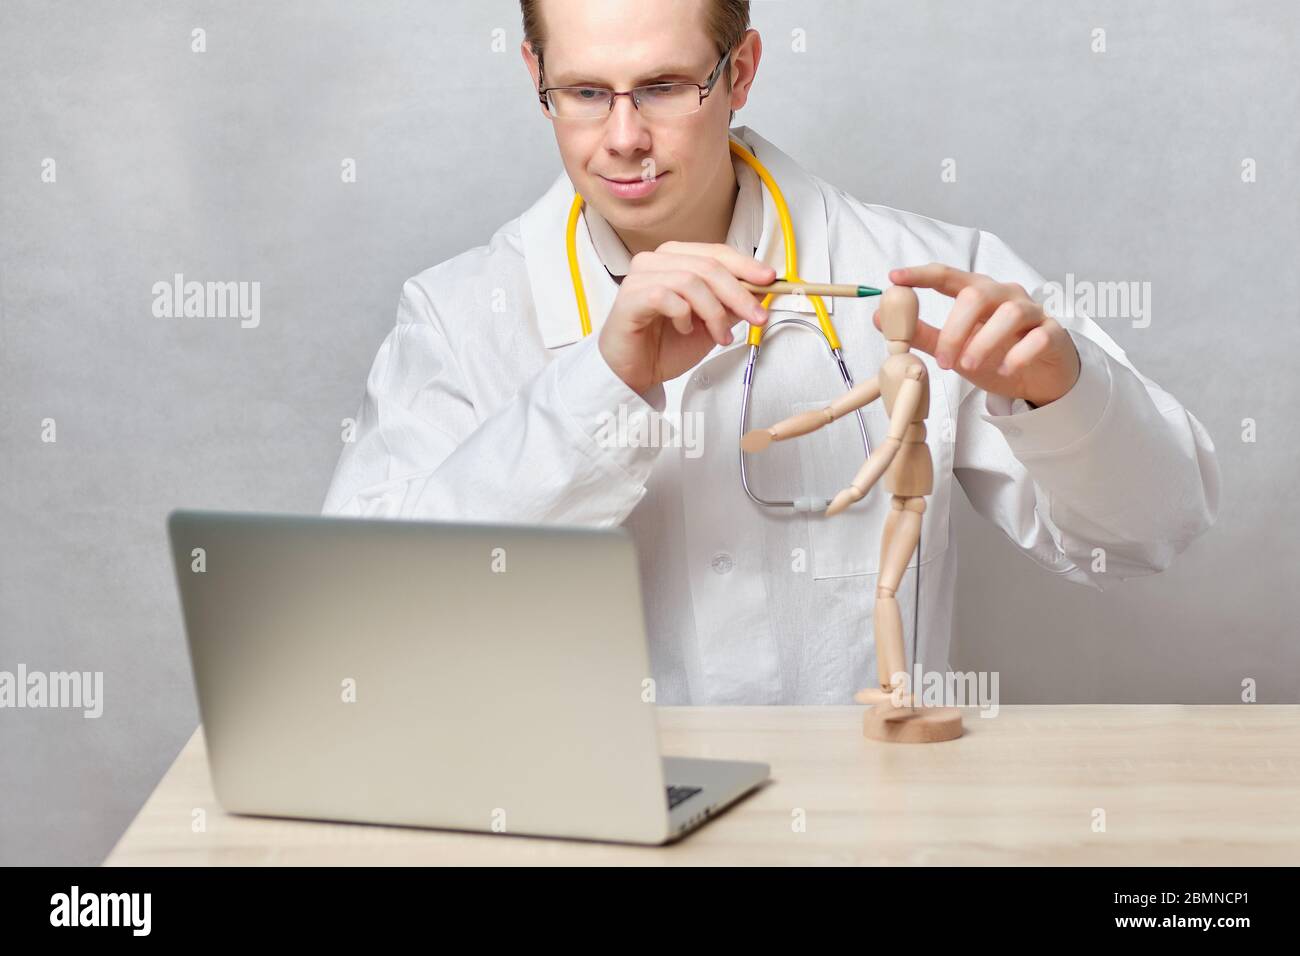 The doctor conducts an online lesson on the treatment of headaches through a laptop. Close up. Stock Photo